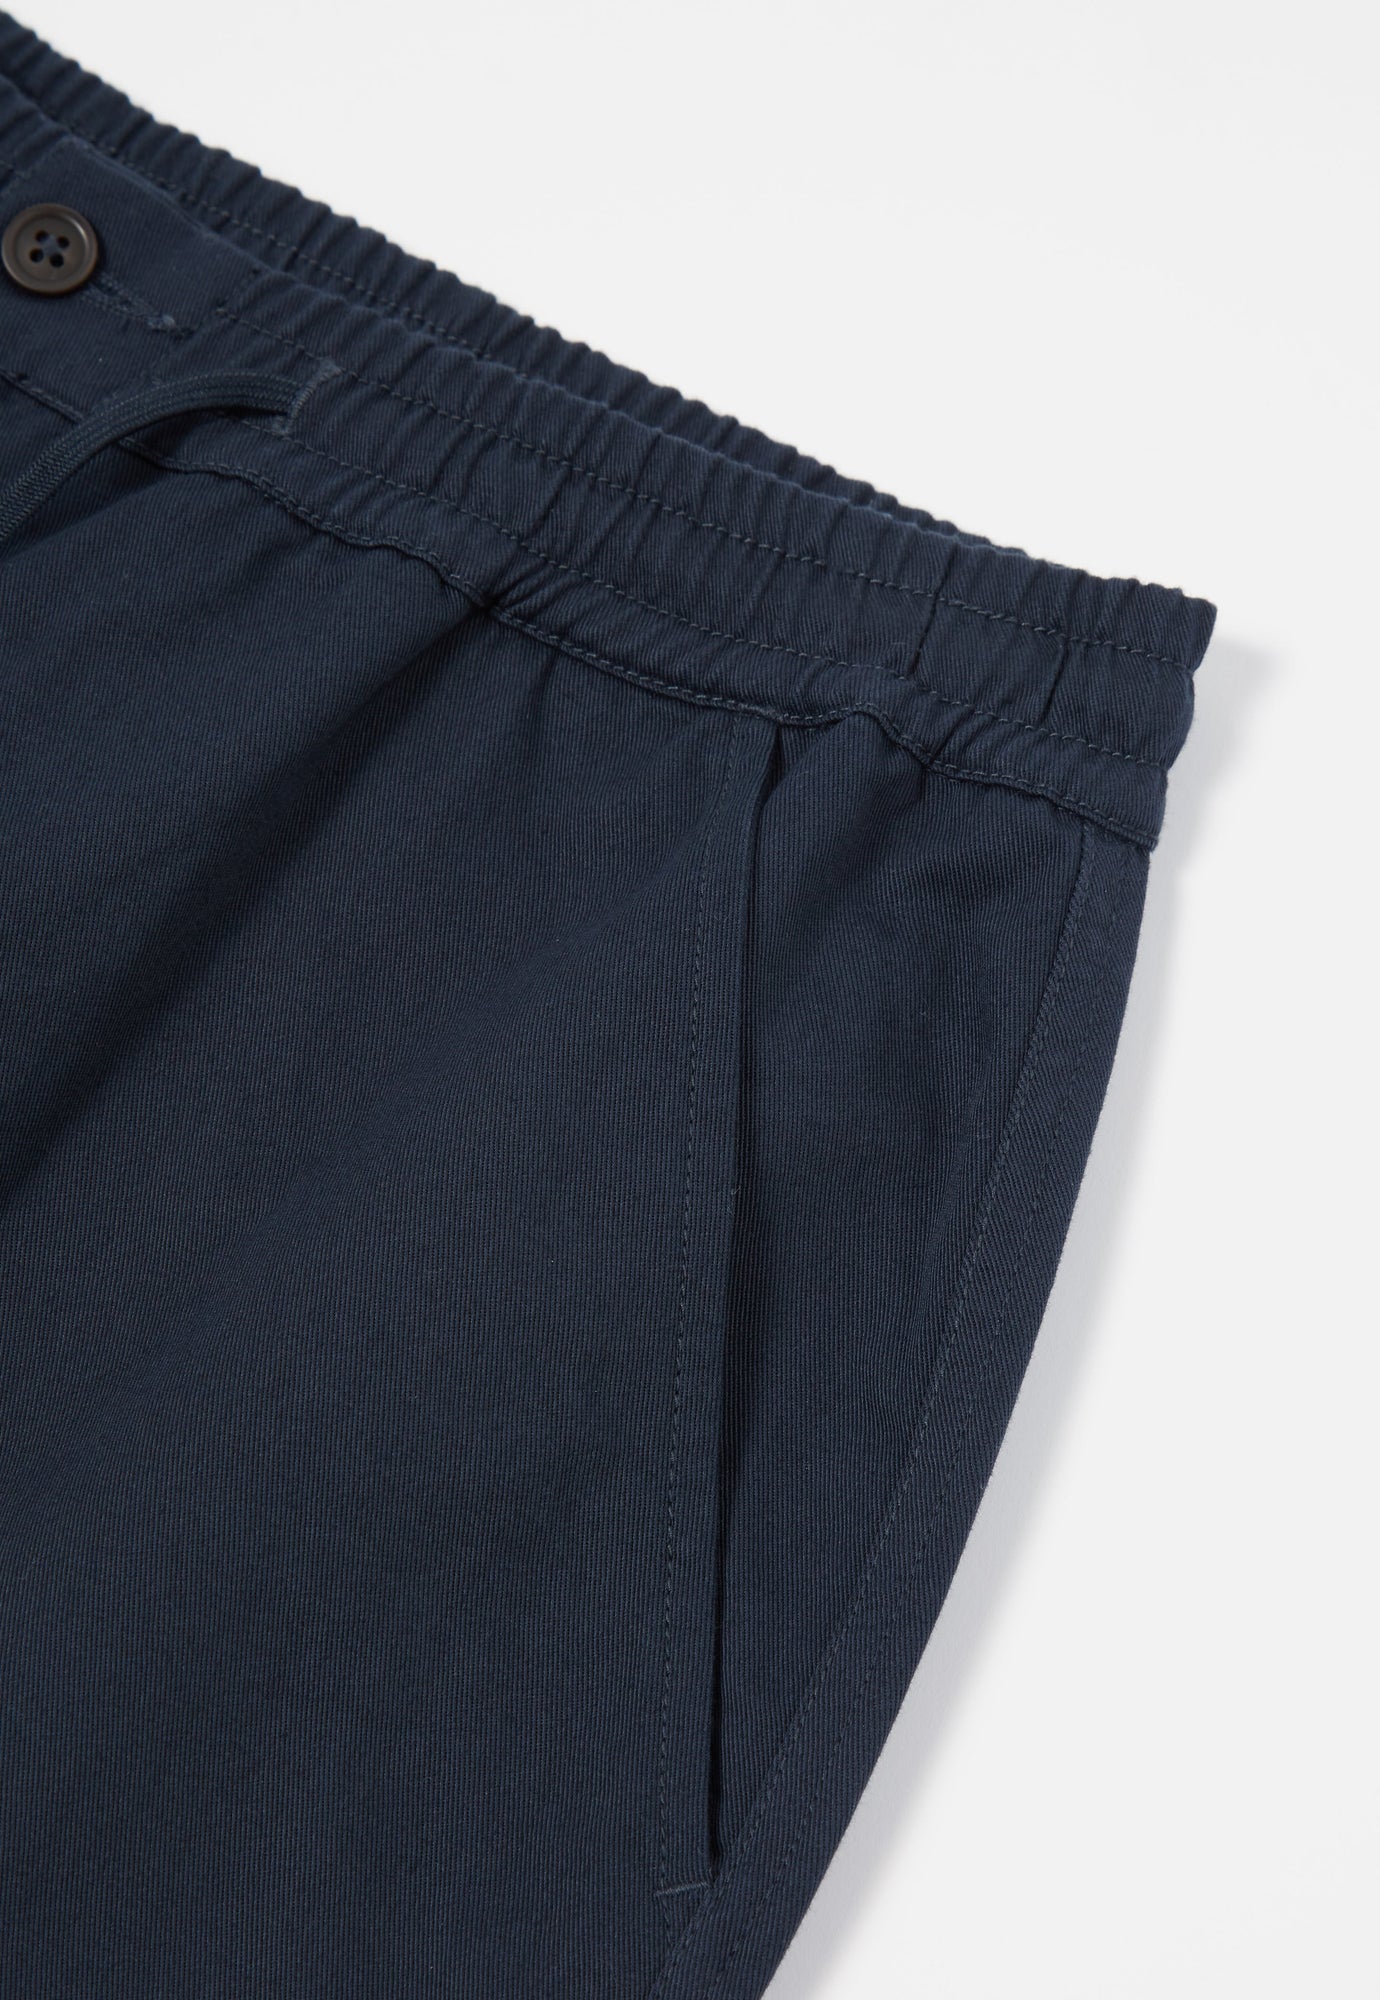 Universal Works Hi Water Trouser in Navy Twill